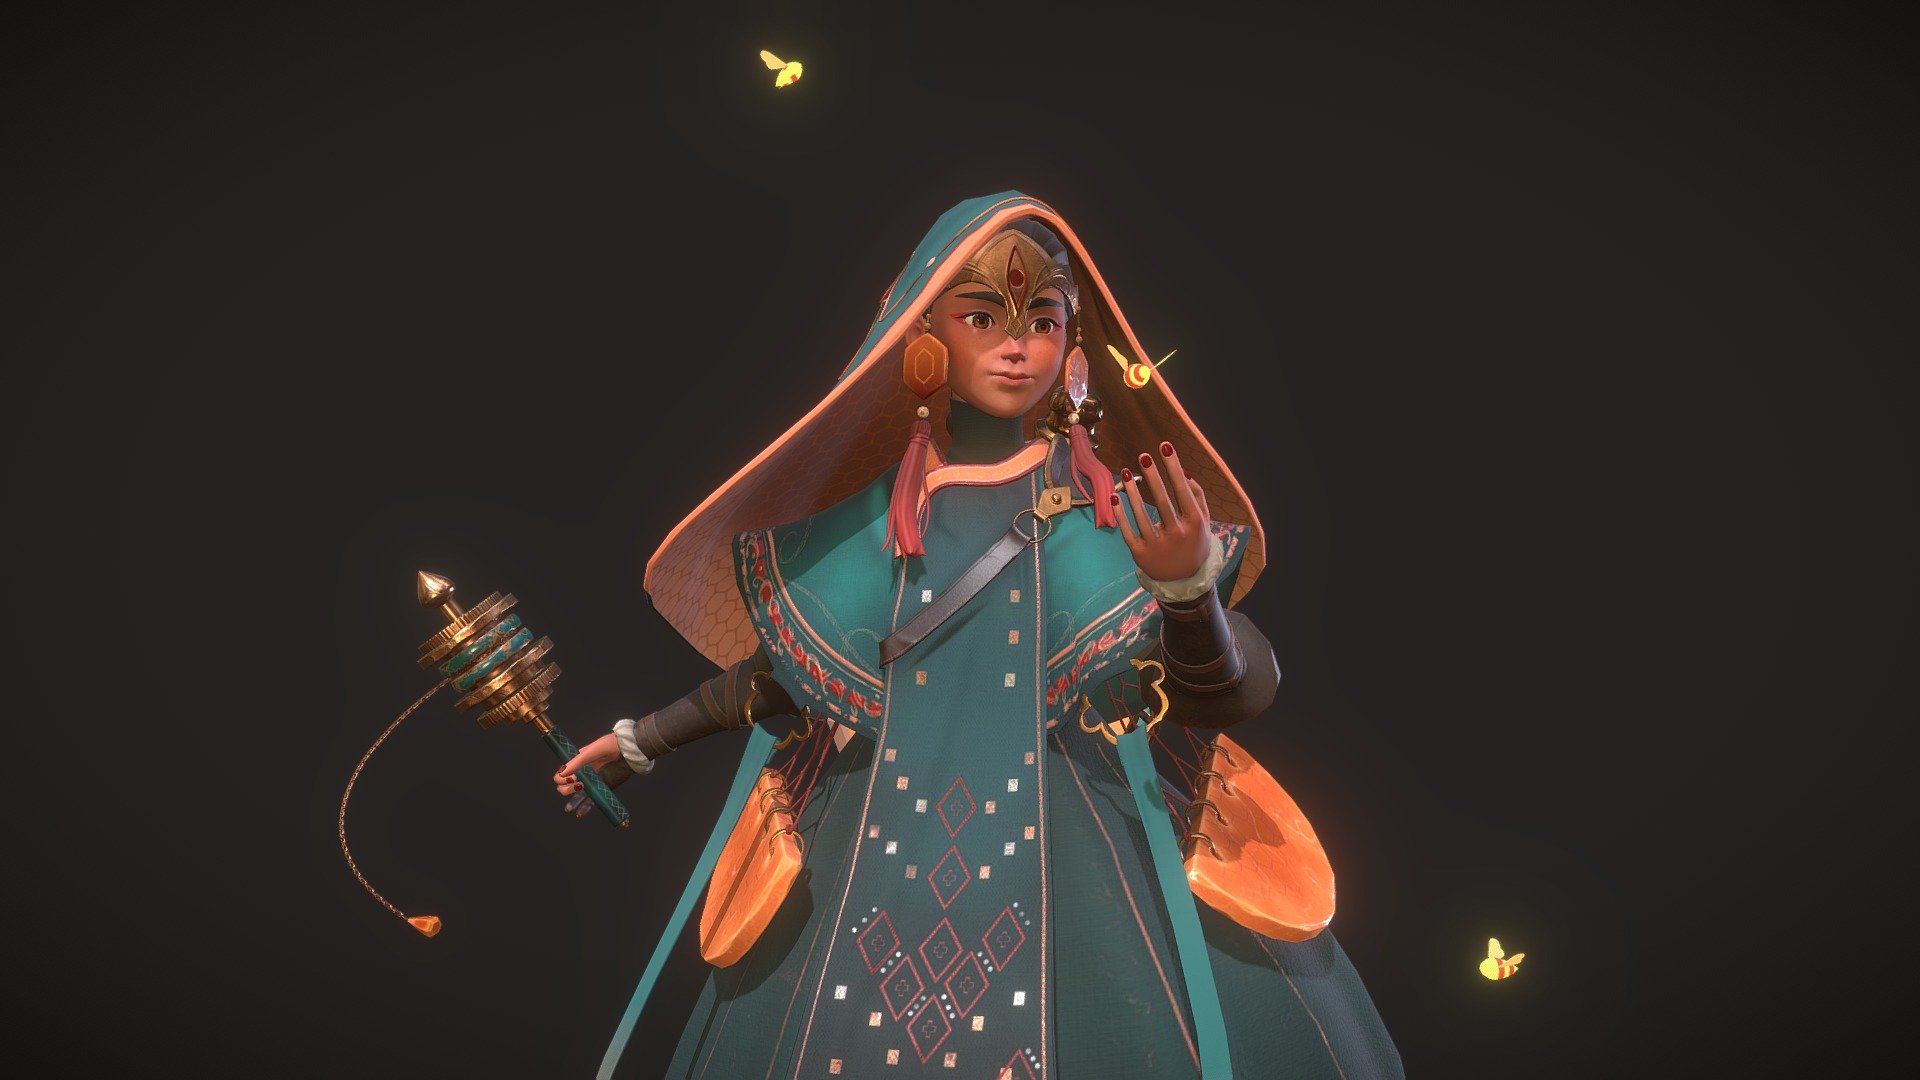 Finished this beautiful character based on the concept Ambrosia by Airi Pan for the Grads in Games challenge this year!
https://www.artstation.com/artwork/3d8eaD

Even though there's some improvements to make I like how it turned out, I really love her works and it was a very good practice for the whole character pipeline and make a fully gameready character :)

The music is Shelter by Alexander Nakarada.

You can find more high res images on my artstation! https://www.artstation.com/artwork/Xn2LPL - The Princess of Ambrosia - 3D model by GiaHanLam 3d model